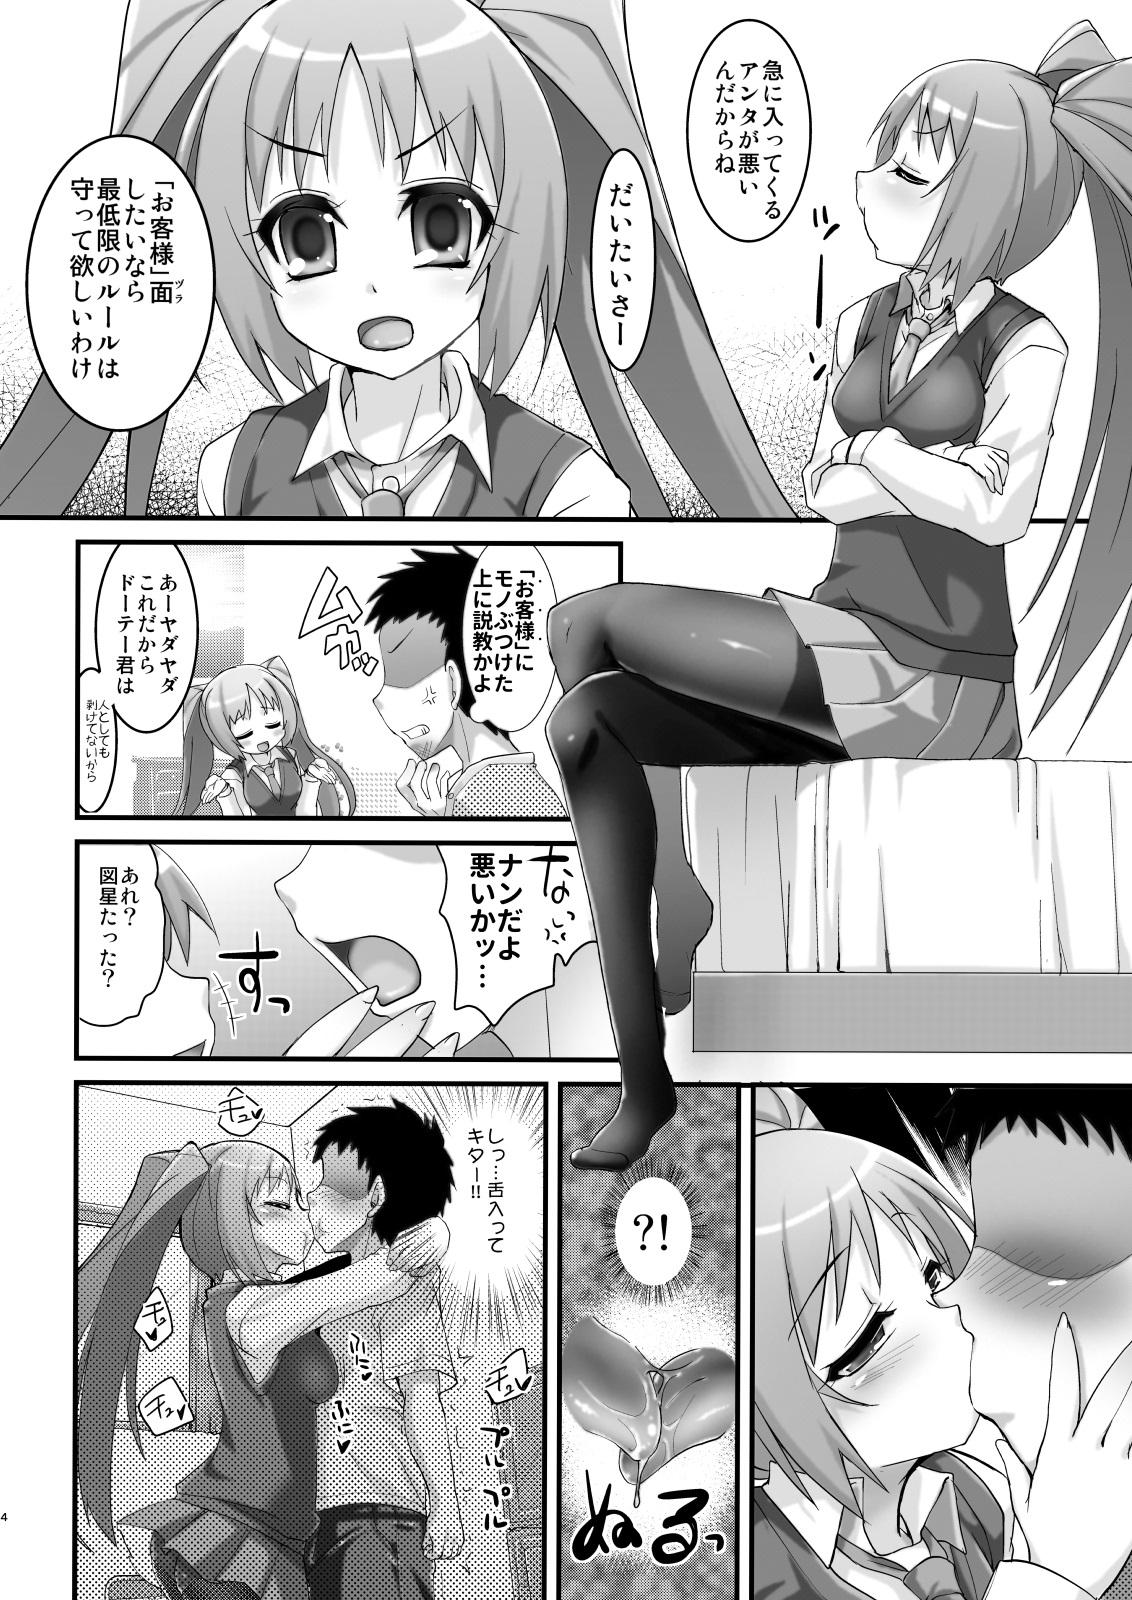 White Girl Tsundere Tights to Twintails - Original Moms - Page 4